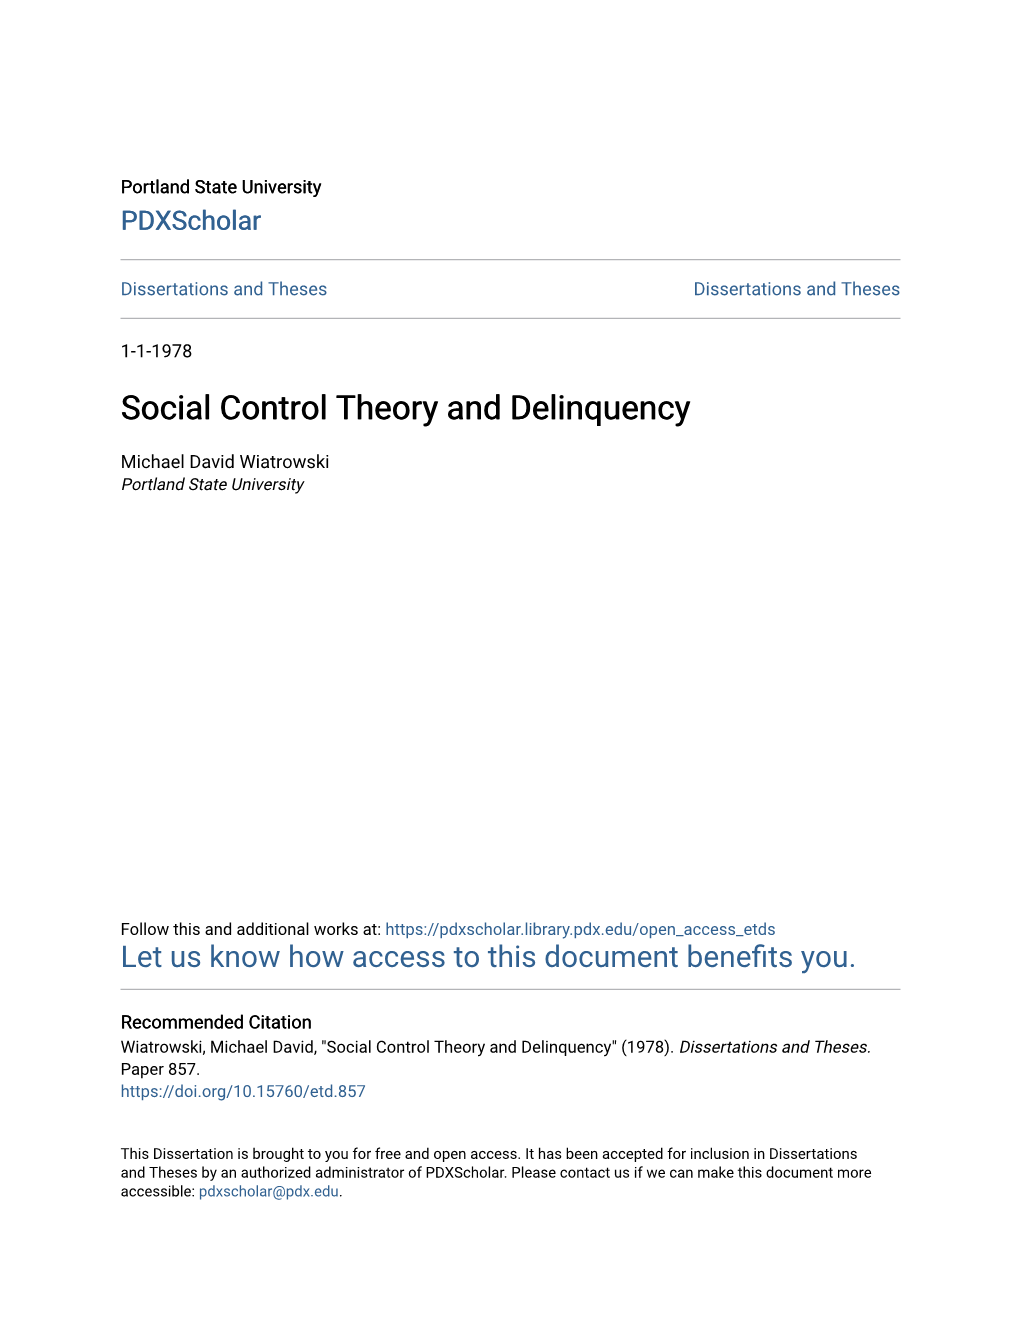 Social Control Theory and Delinquency